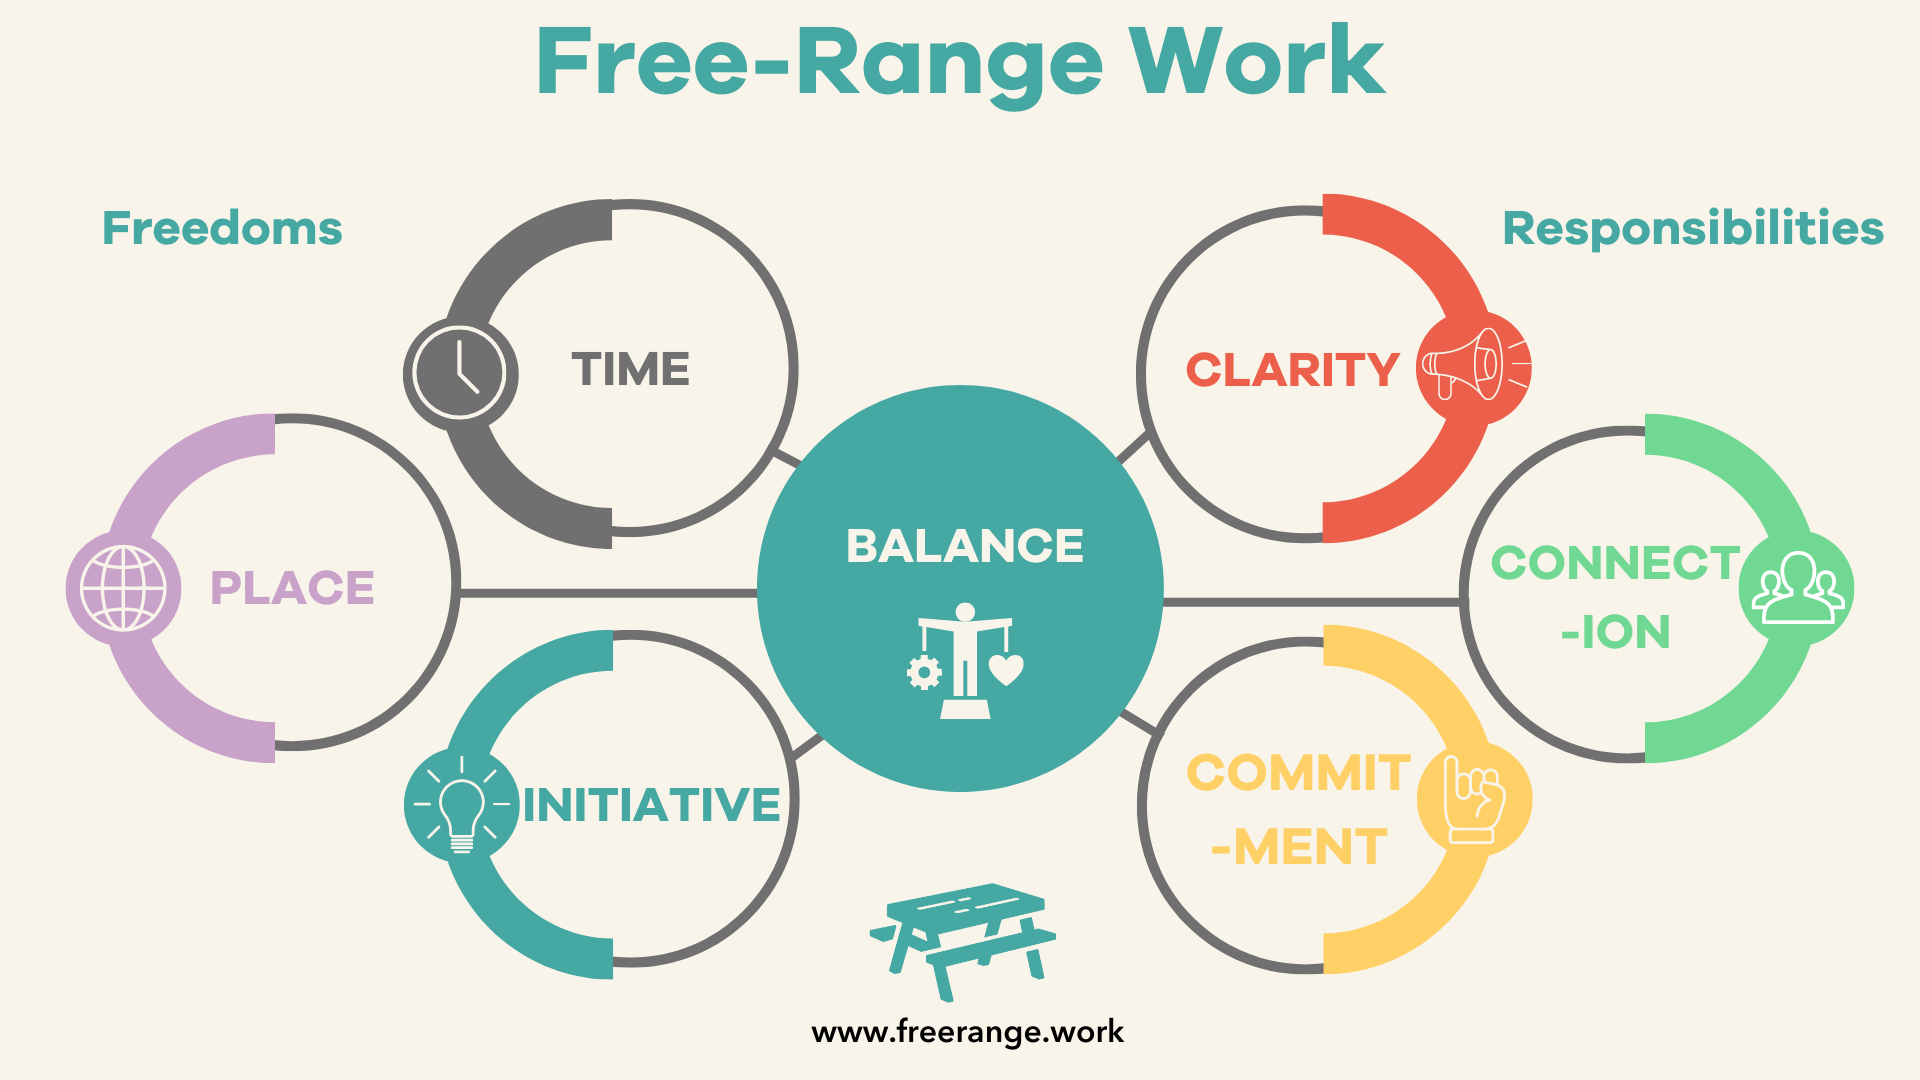 A diagram showing the Free Range work model, with the freedoms in balance with responsibilities